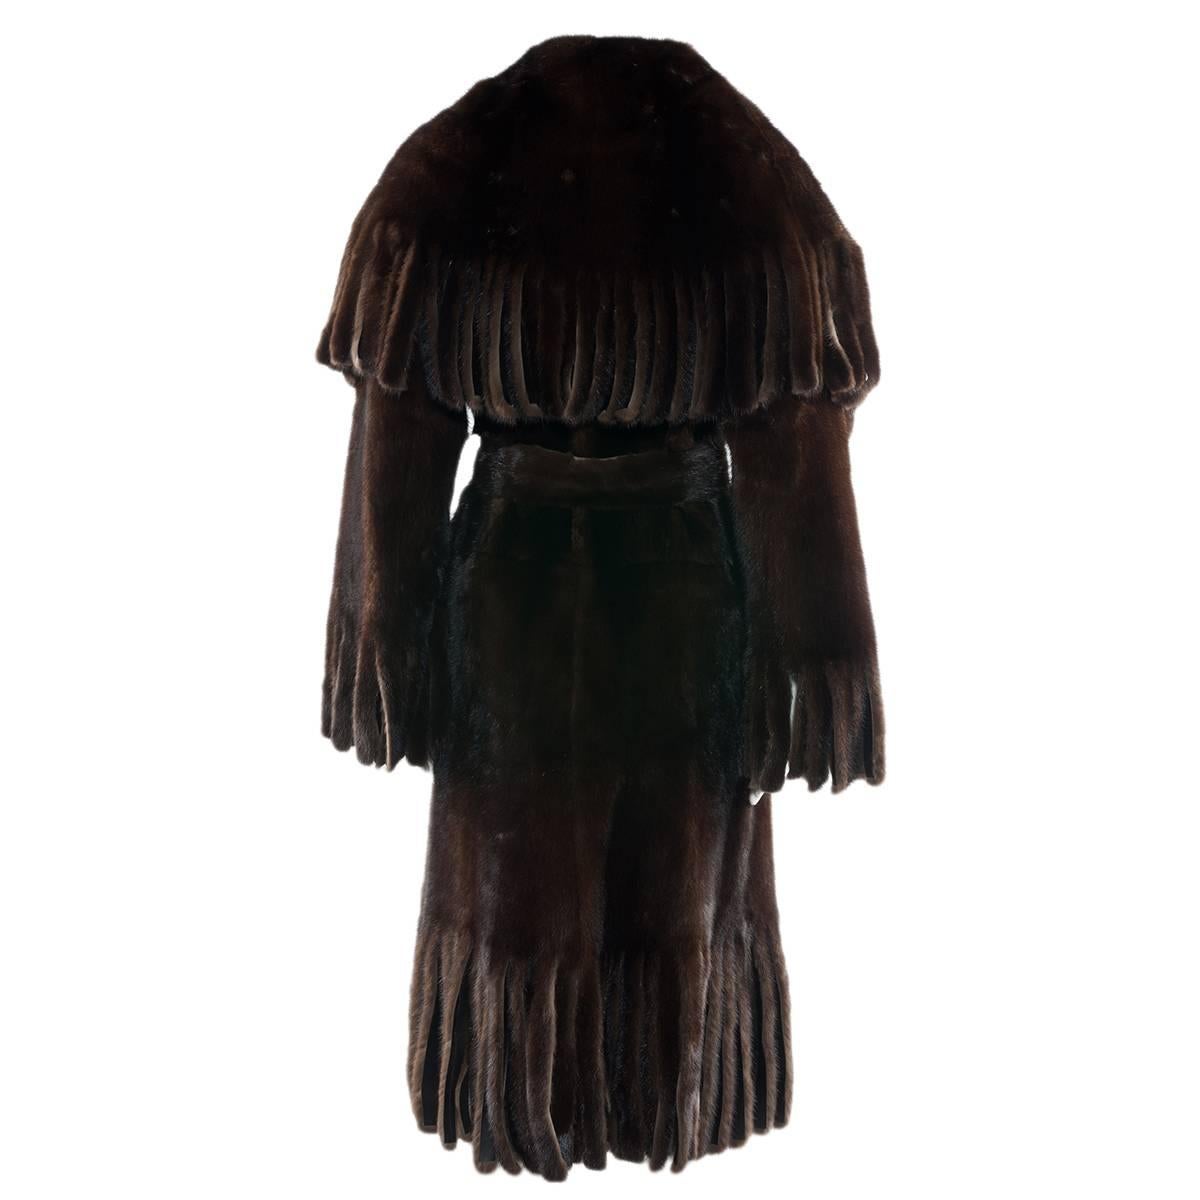 Magnificent Dolce & Gabbana fur coat
Ultra rare (only 4 exemplary sold in the entire world)
100% Brown mink fur
100% Brown leather inside
Fantastic cut with frings(carved, not added) 
Large back shawl
7 Authomatic buttons
Size italian 42 (US